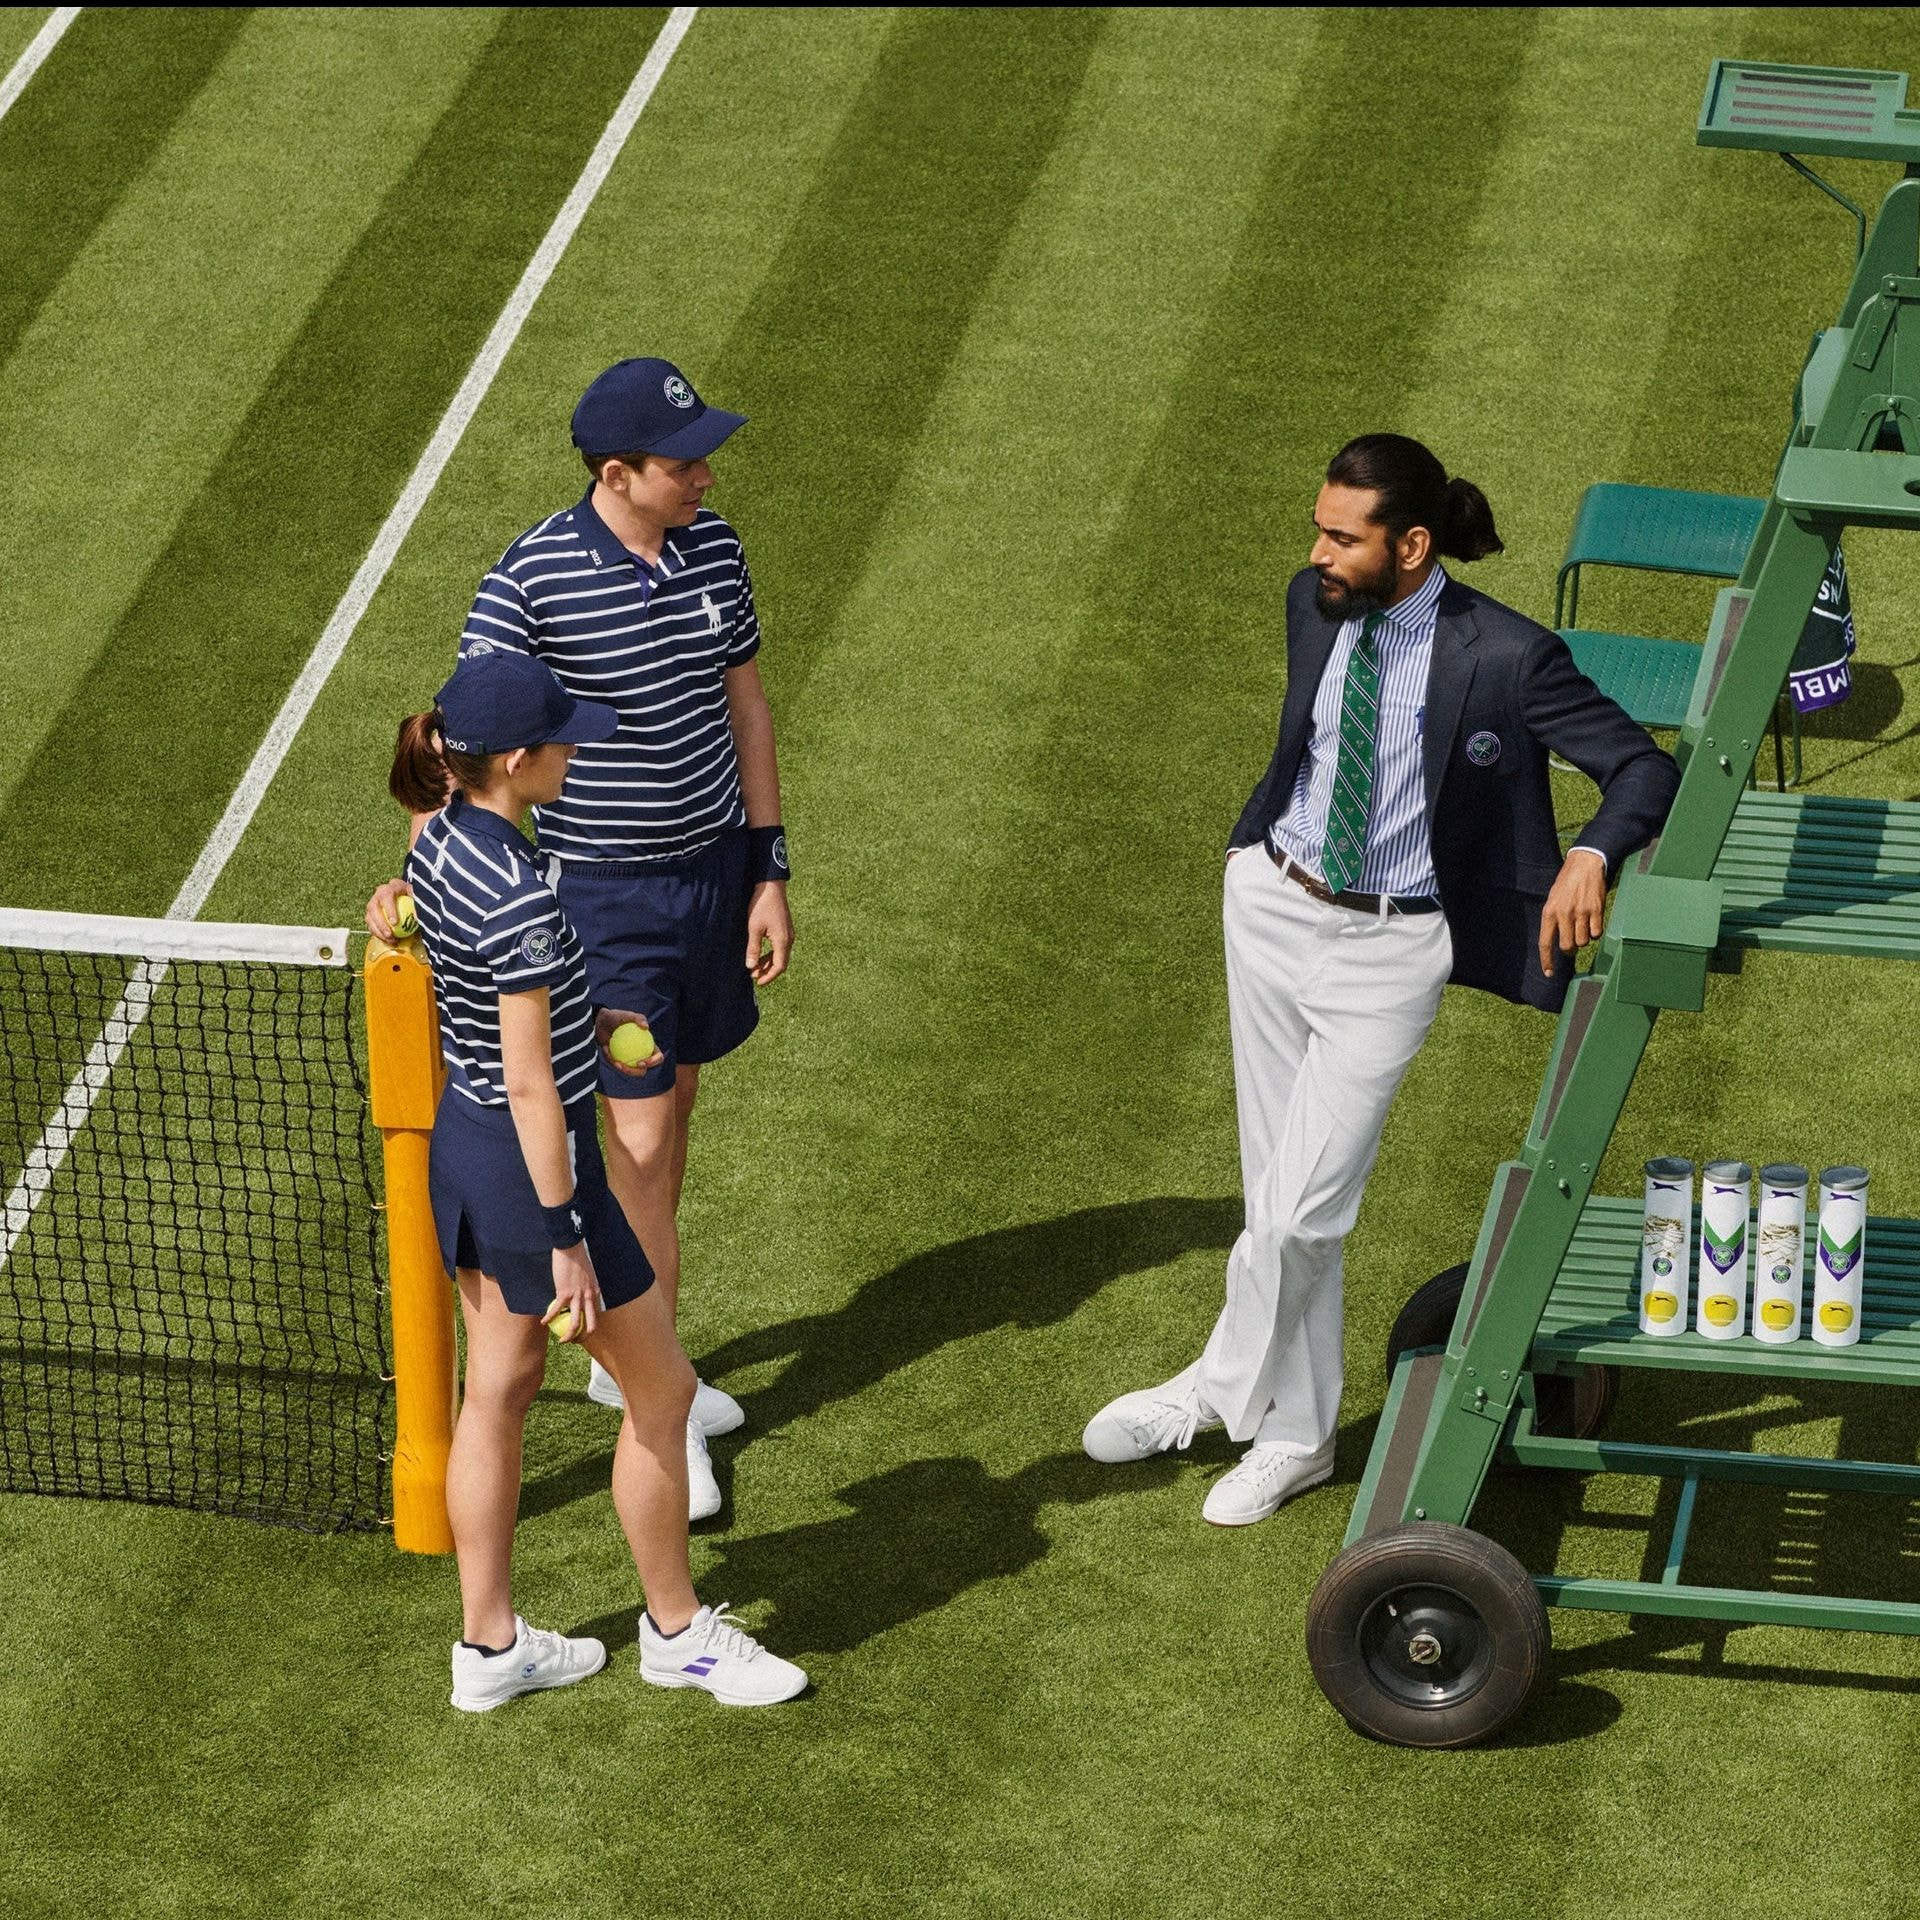 Ralph Lauren kit out Wimbledon with new sustainably focused